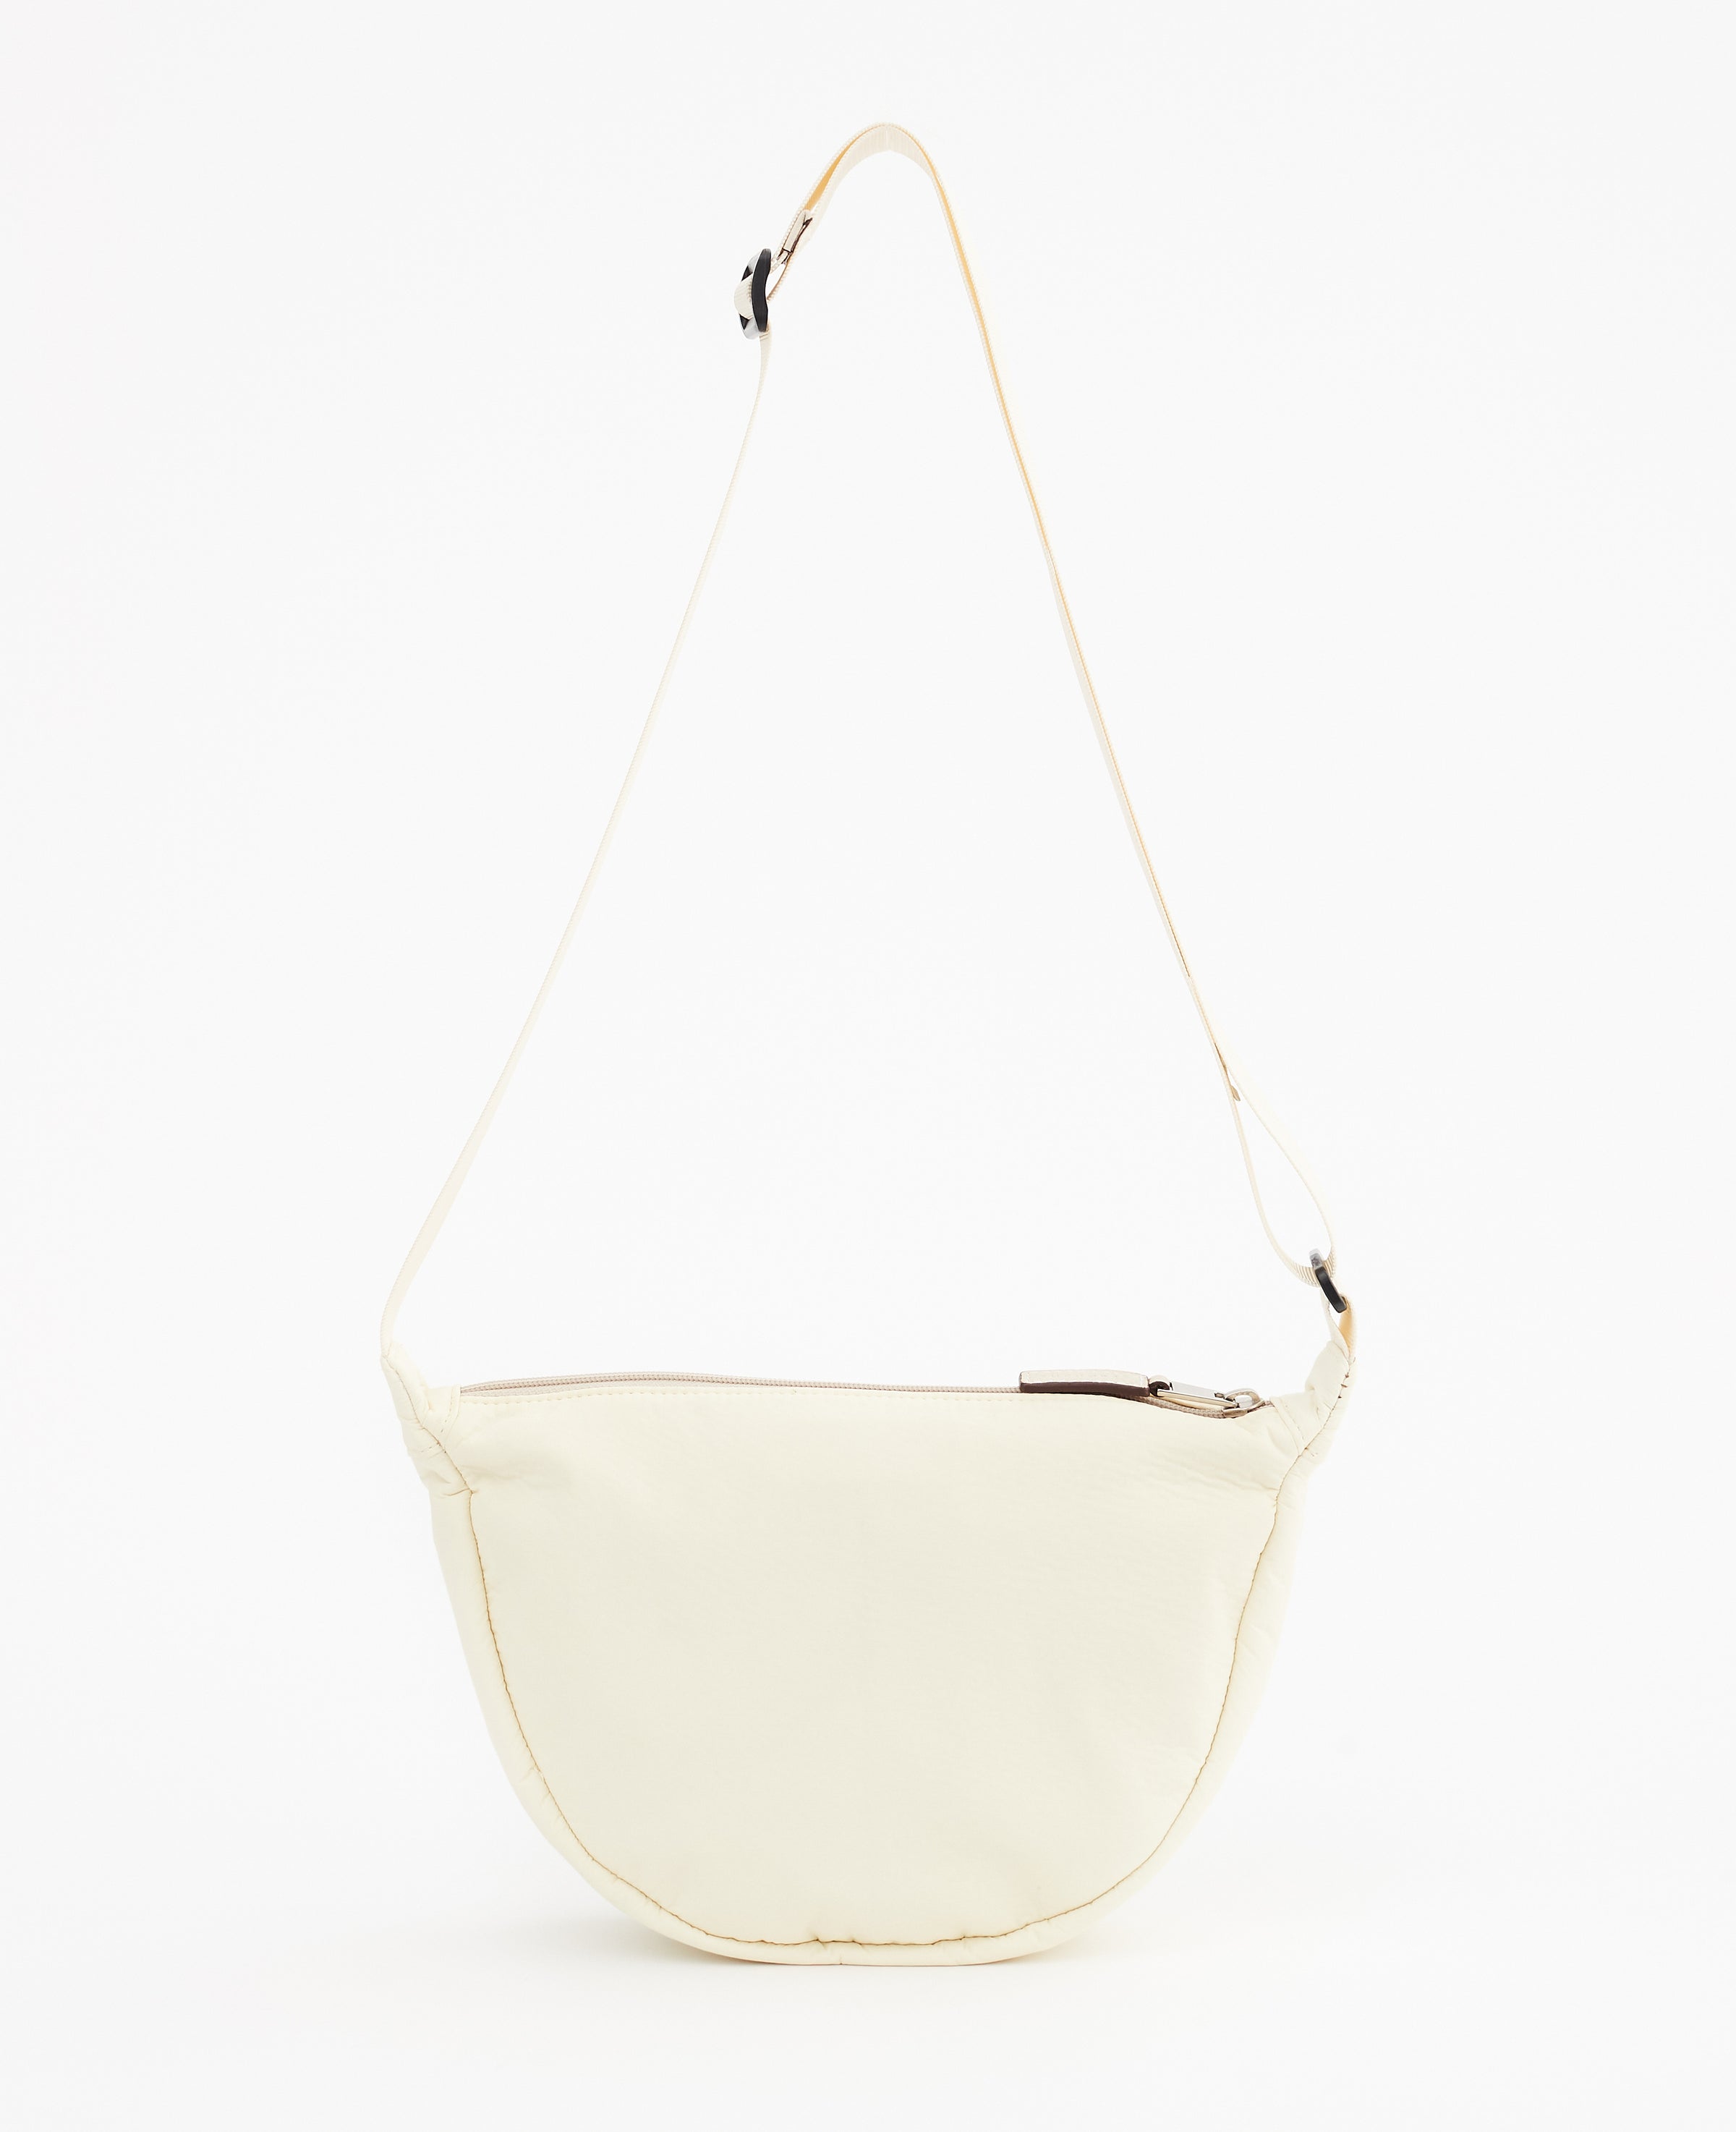 The Sporty Crossbody Bag Milk White Recycled Nylon / Leather Trim by The Horse®